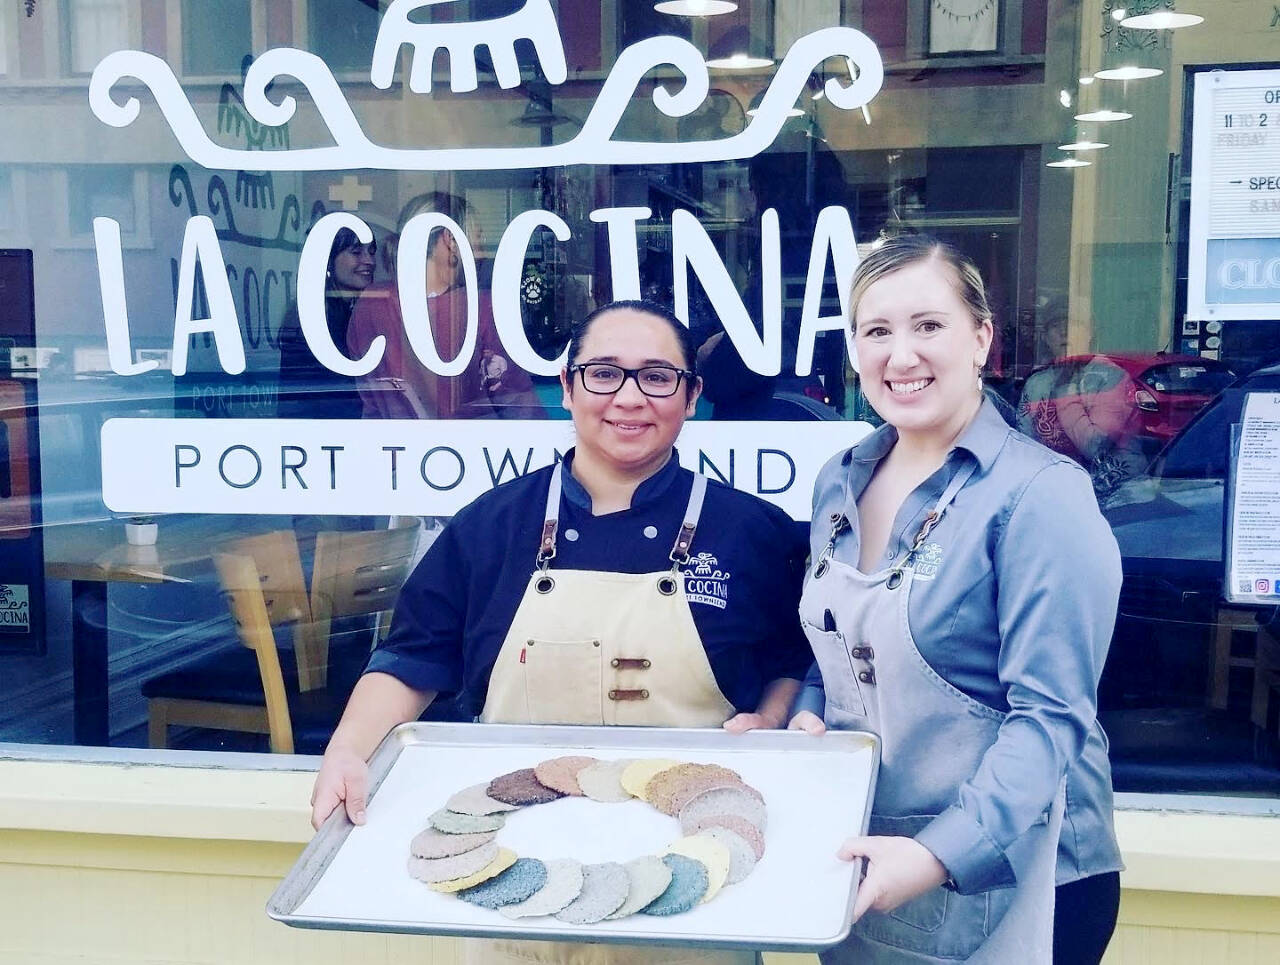 Cassandra and Lissette Garay, owners of La Cocina Port Townsend, mark their first year in business.